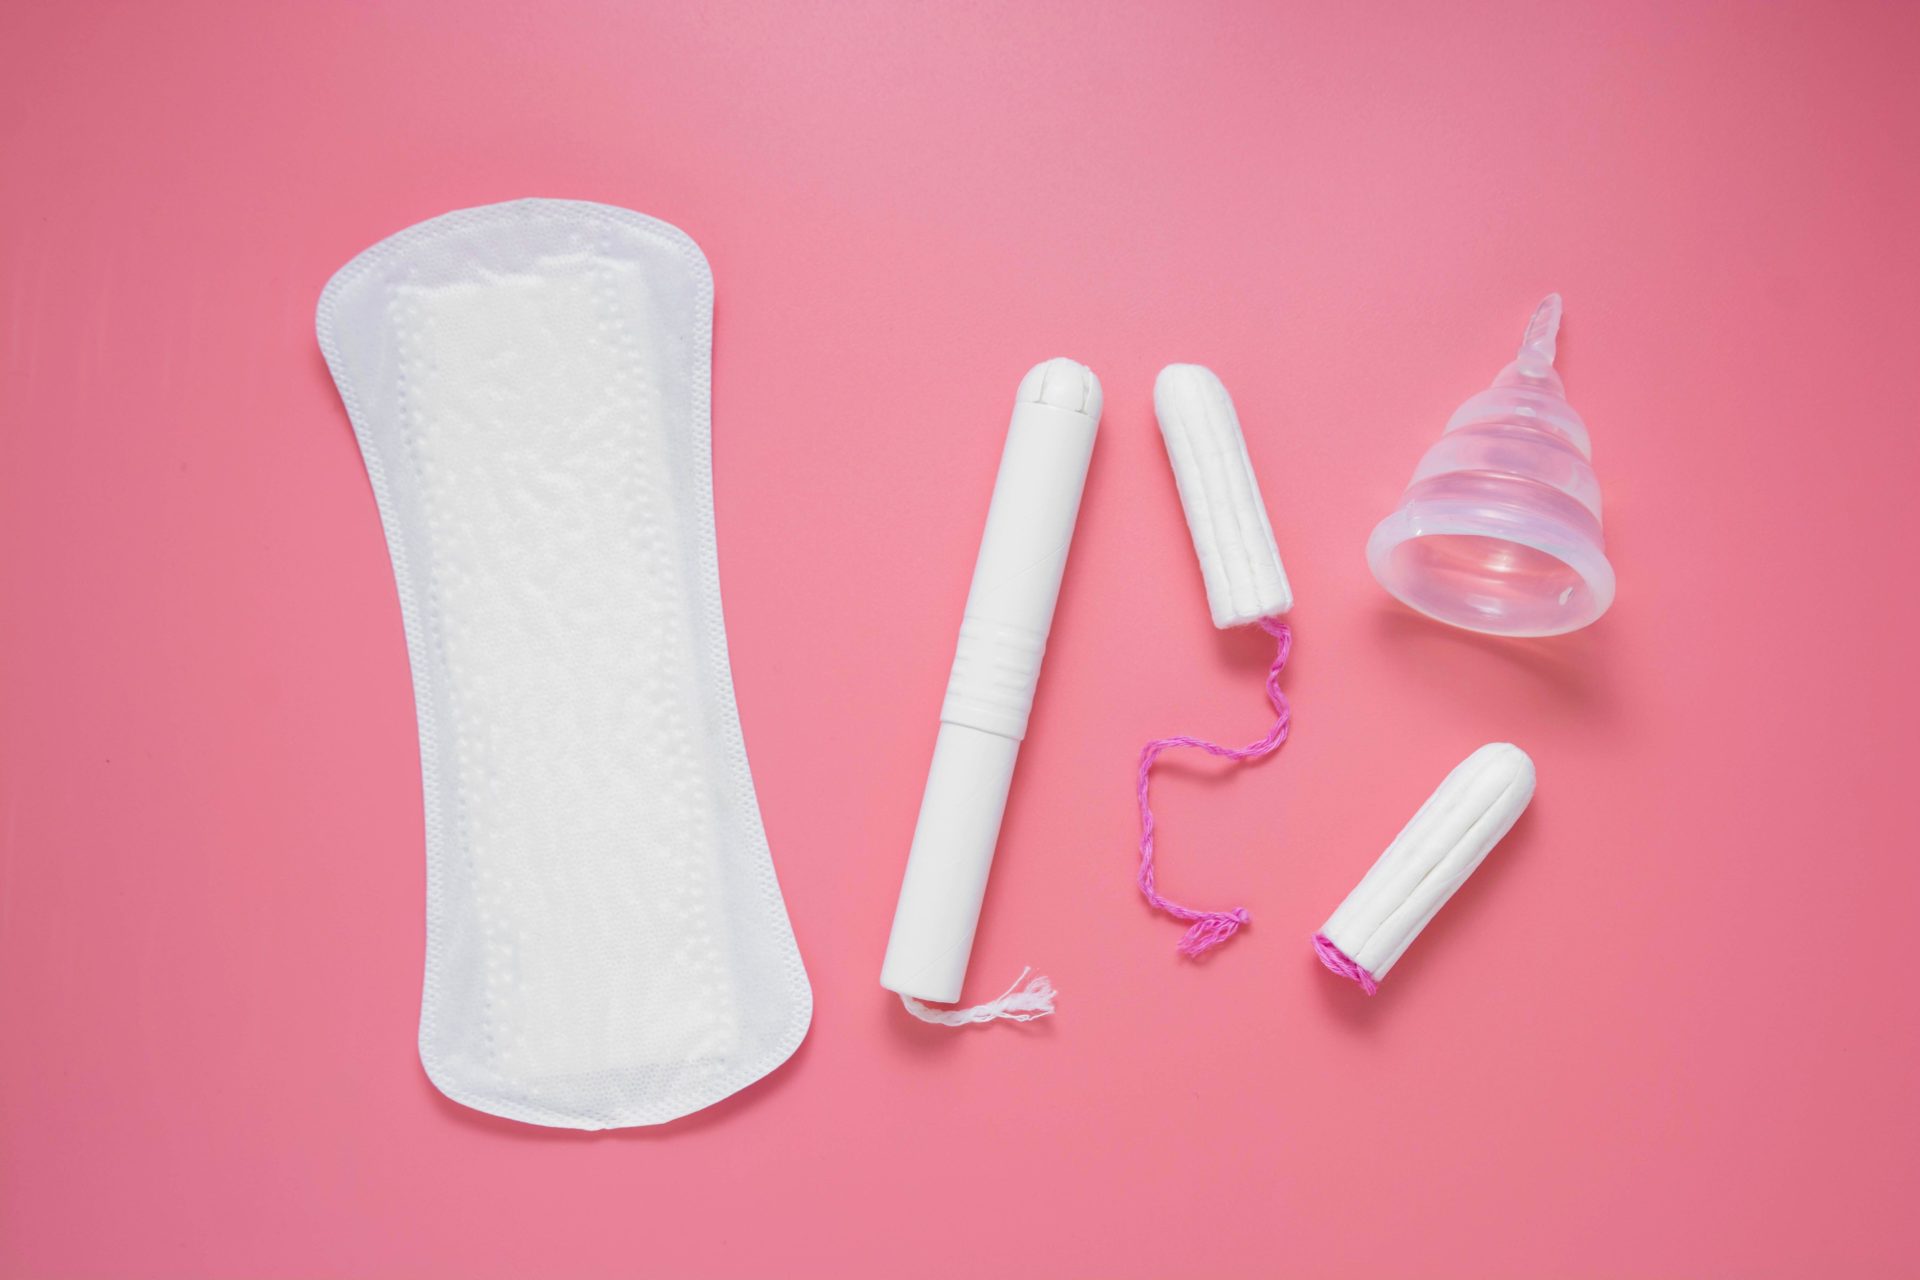 Woman hygiene products, menstruation, cotton tampons, sanitary pads, menstrual cup